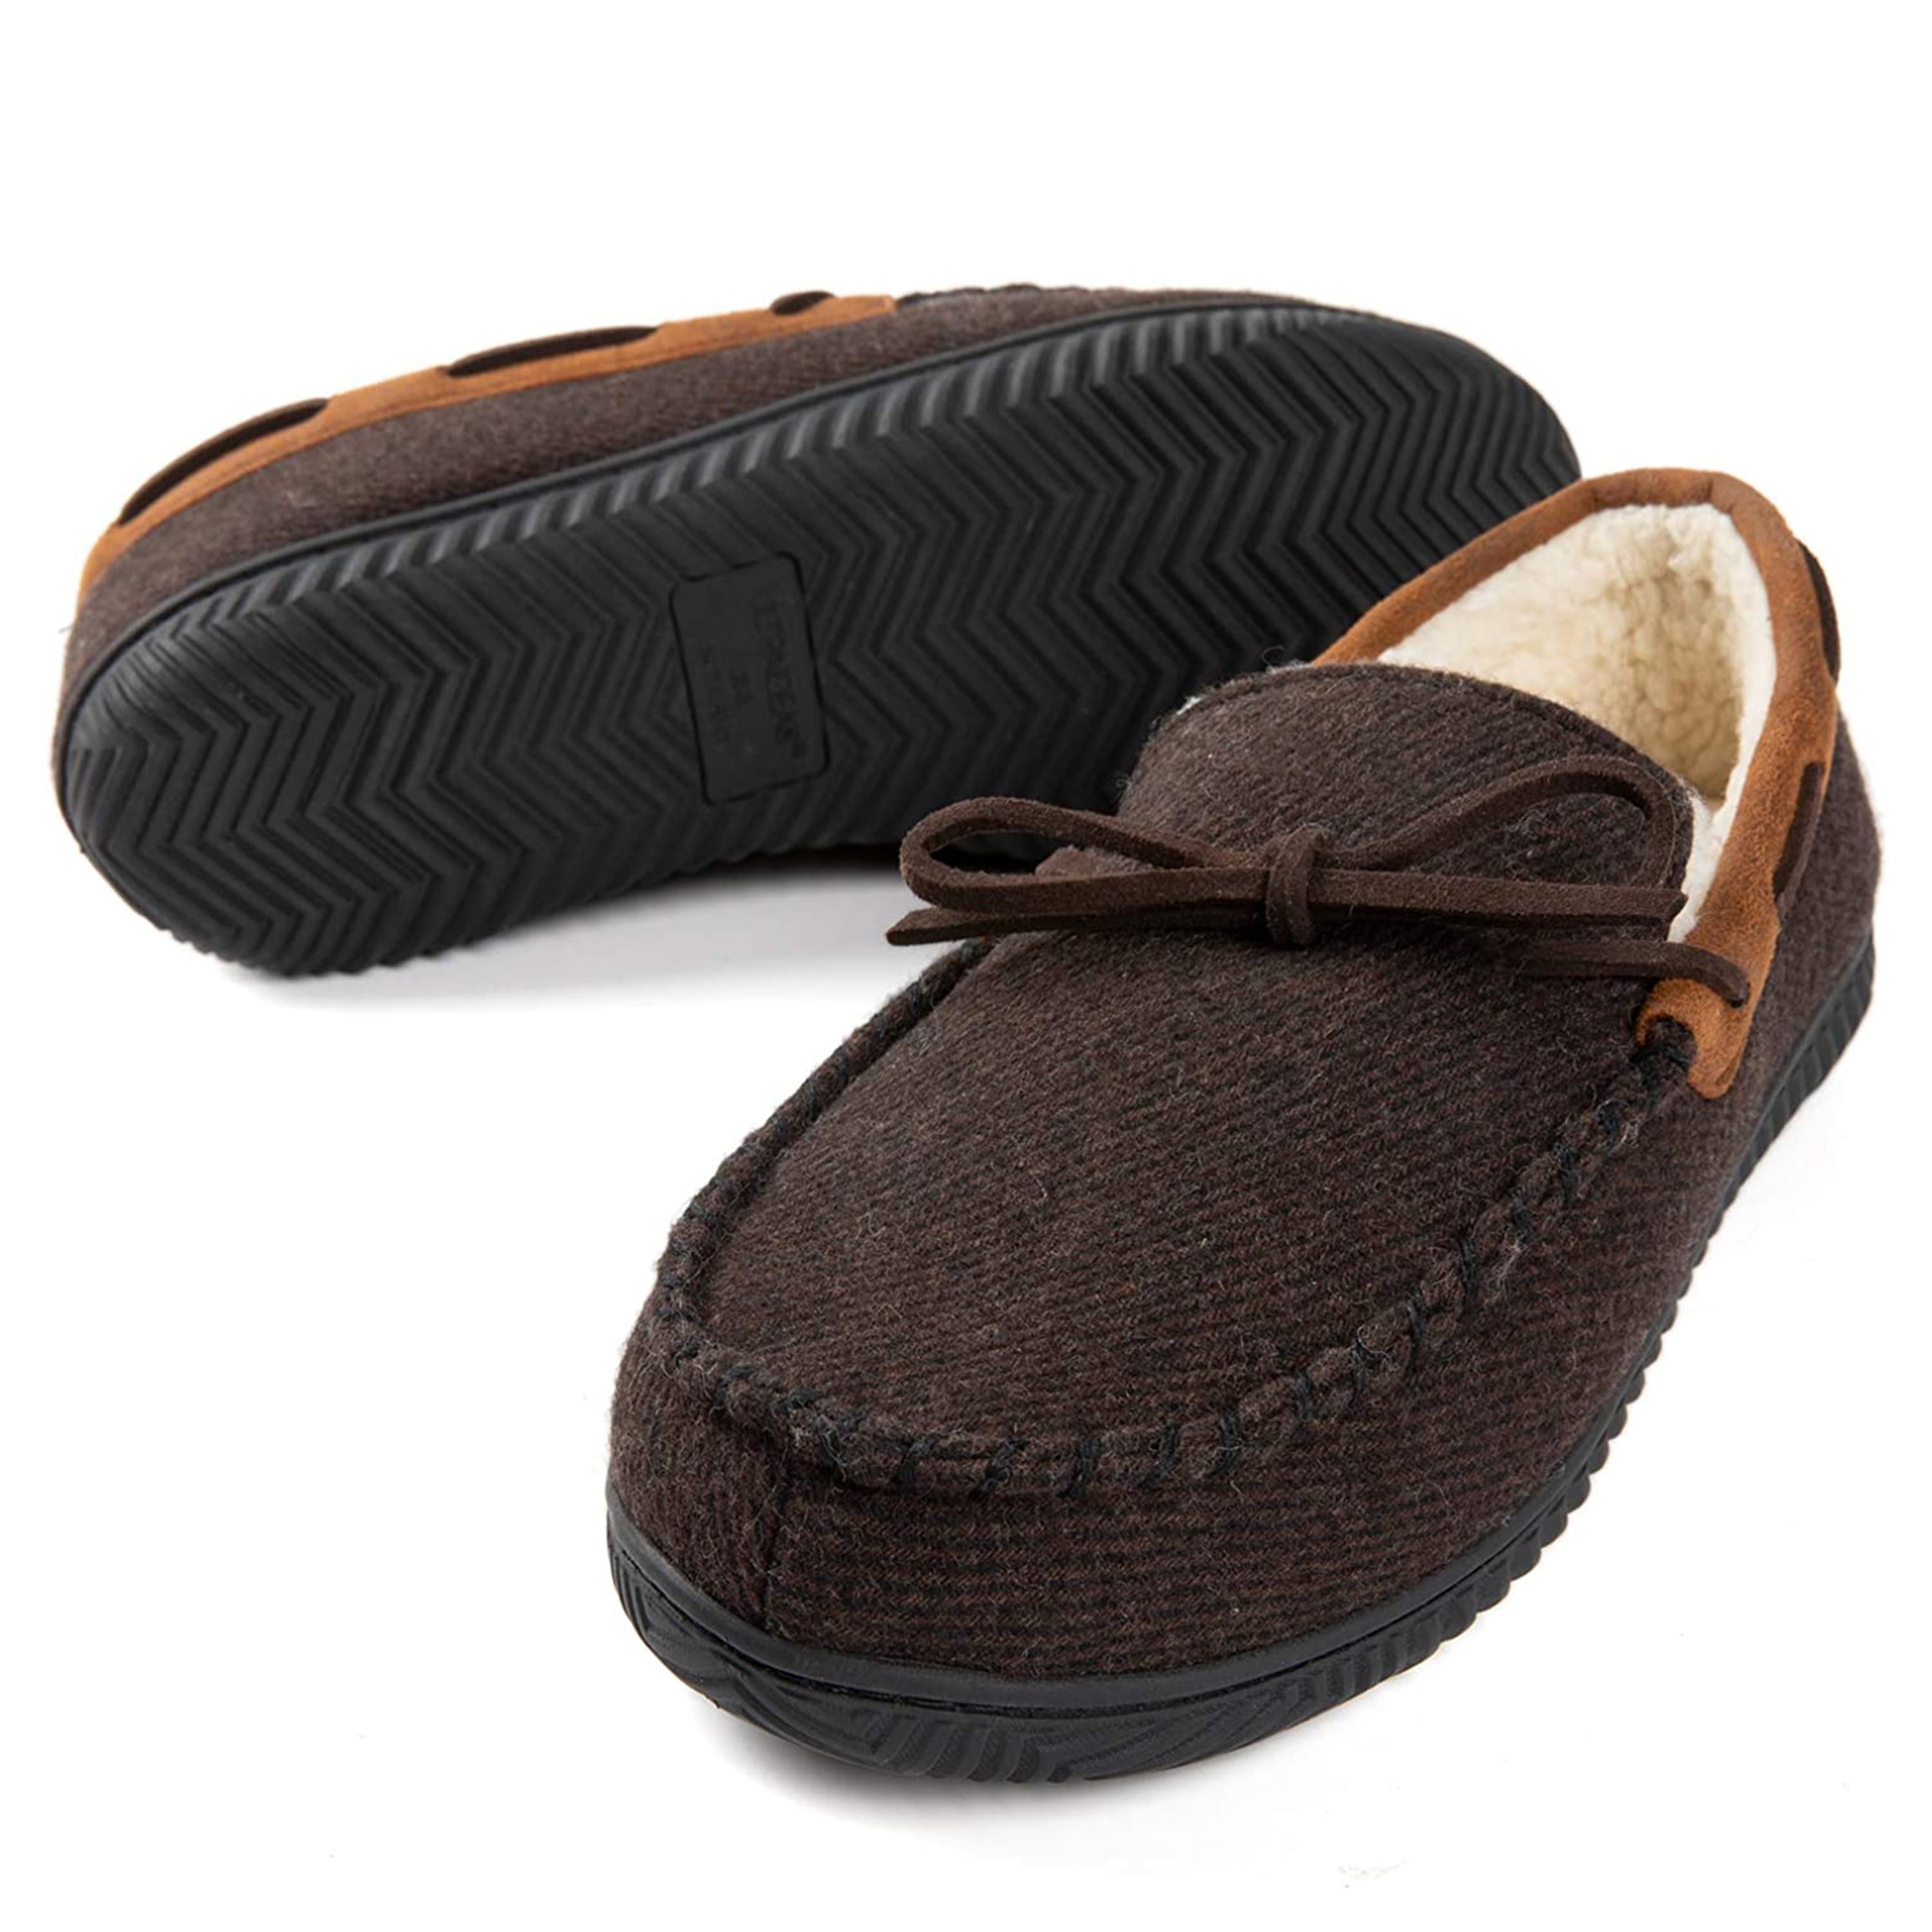 Mens Moccasin Slippers for Men House Indoor Shoes with Red Plaid and Anti Slip Rubber Sole